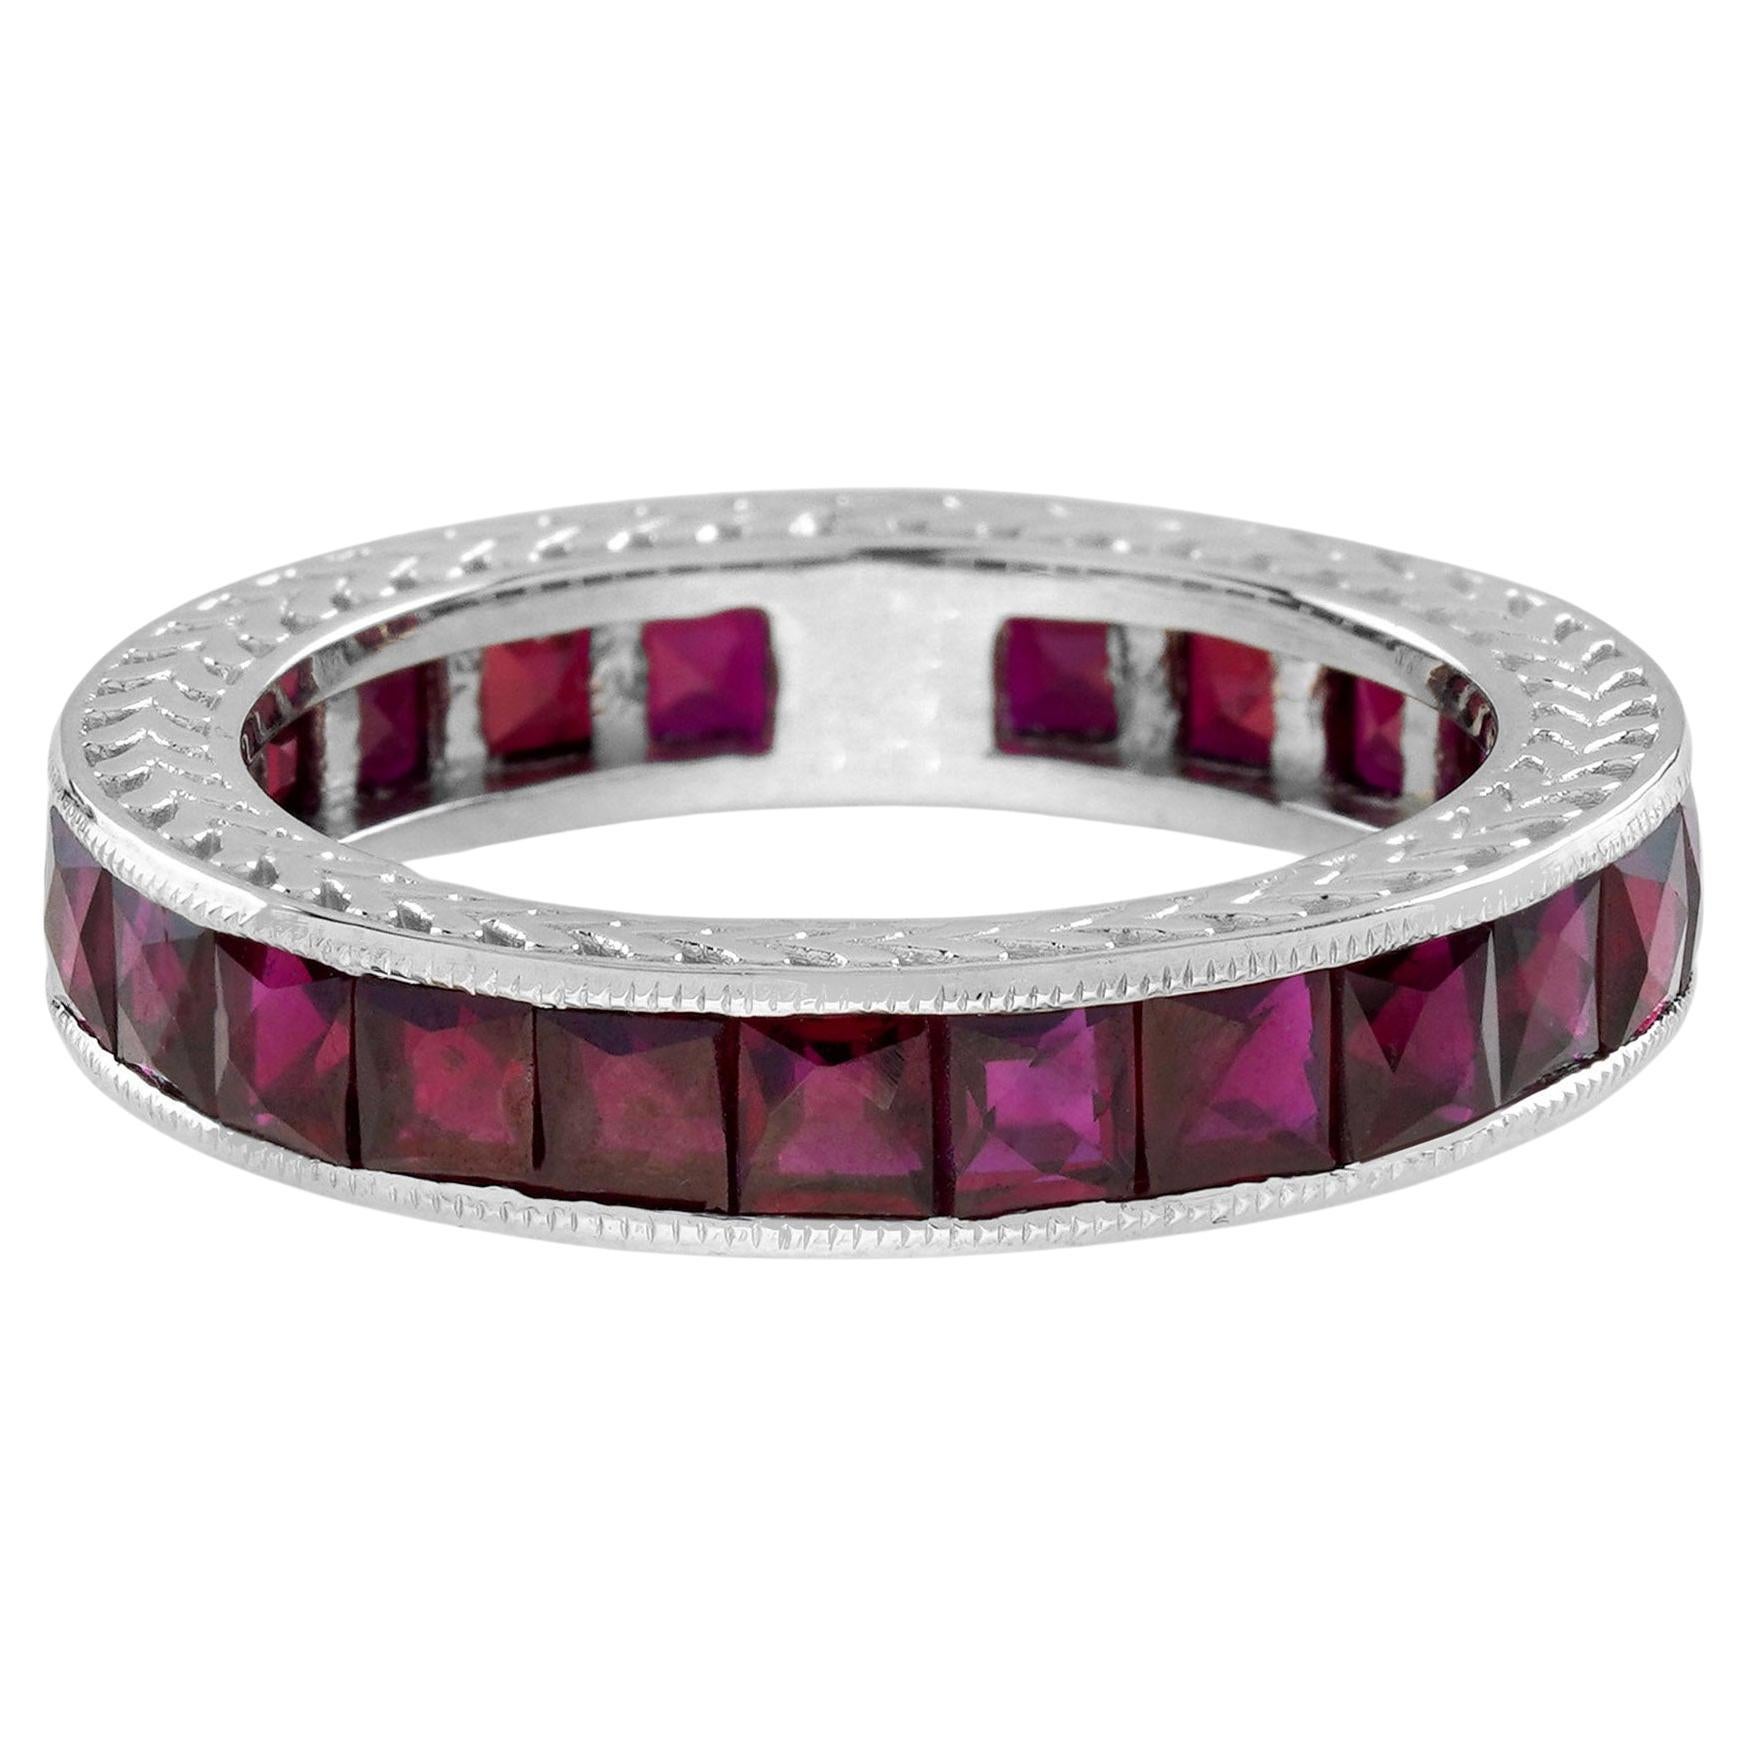 3.37 Ct. Ruby Antique Style Eternity Band Ring in Platinum 950 For Sale